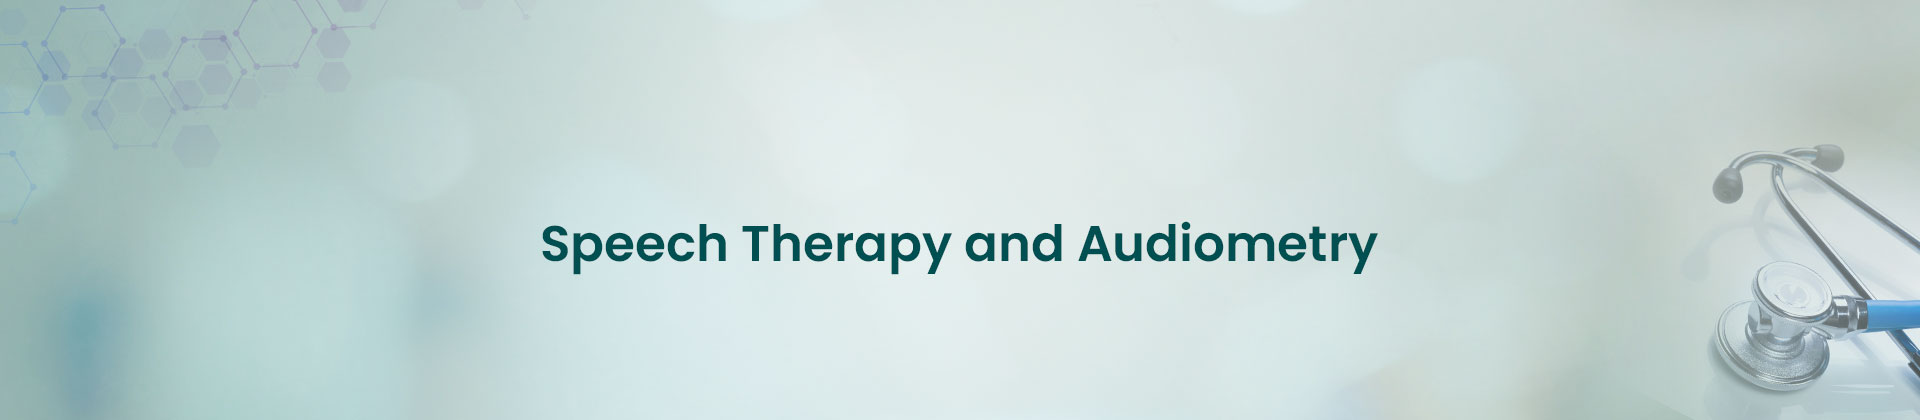 Speech Therapy and Audiometry